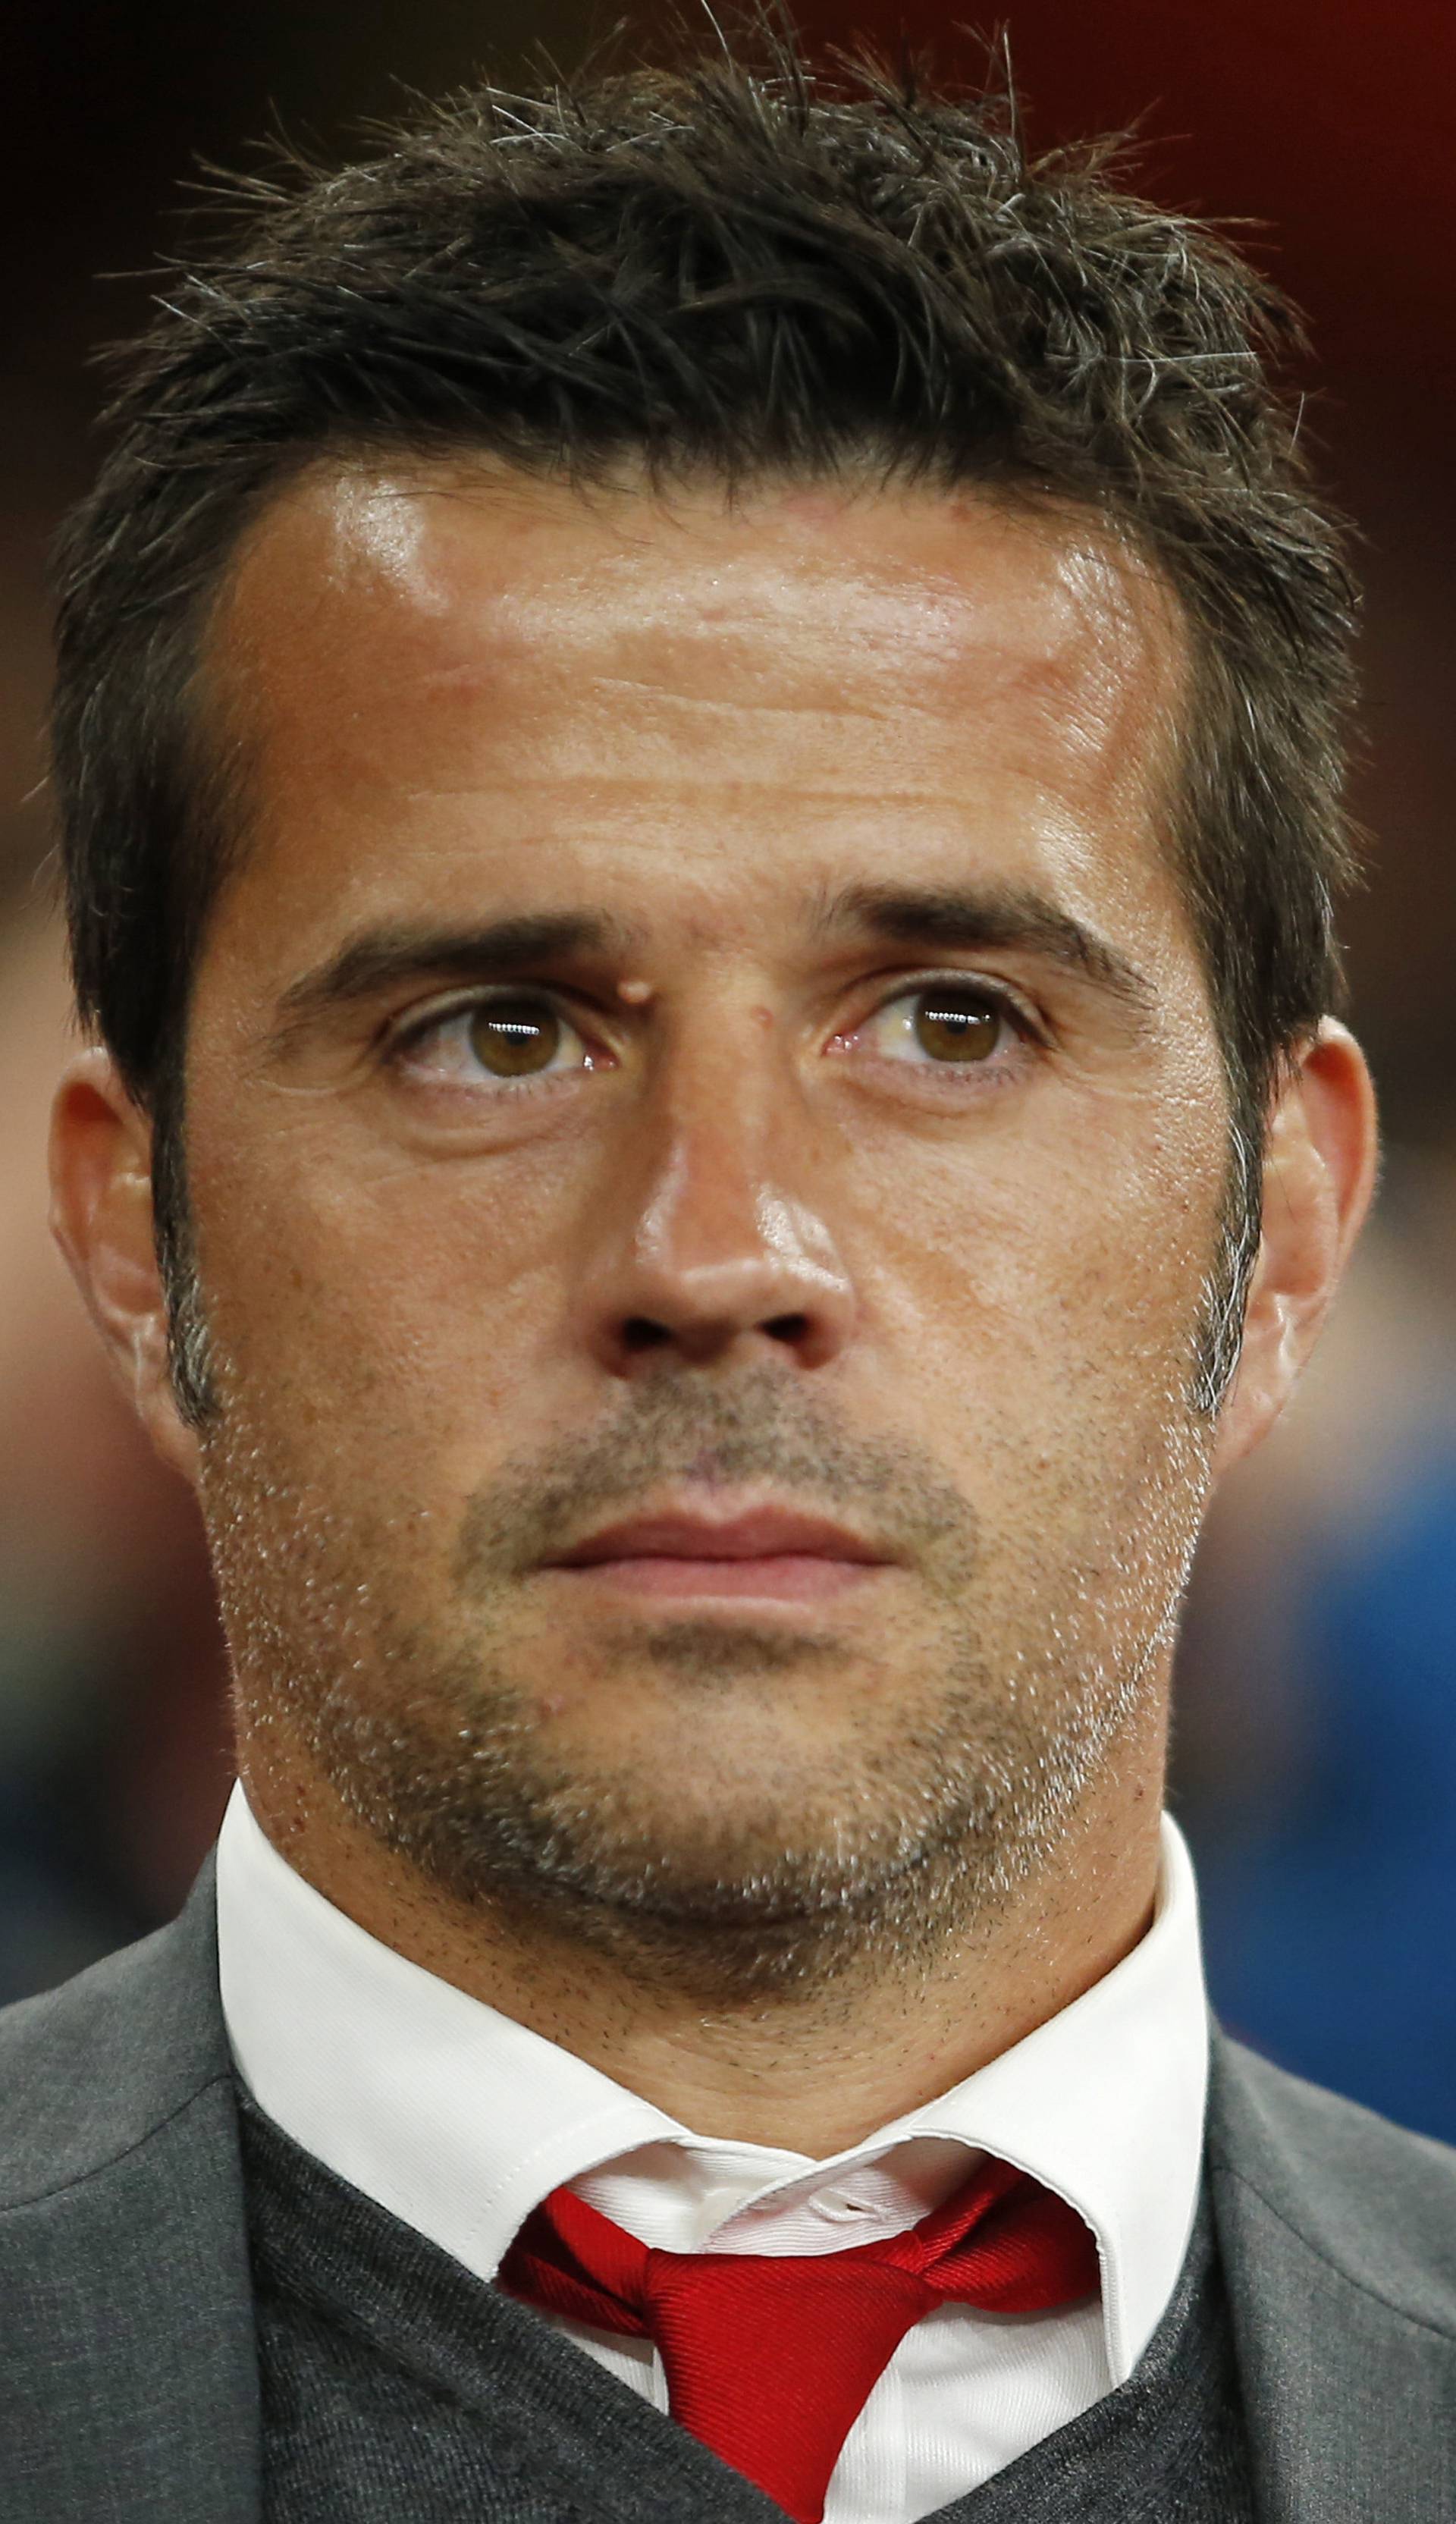 Olympiacos coach Marco Silva before the match